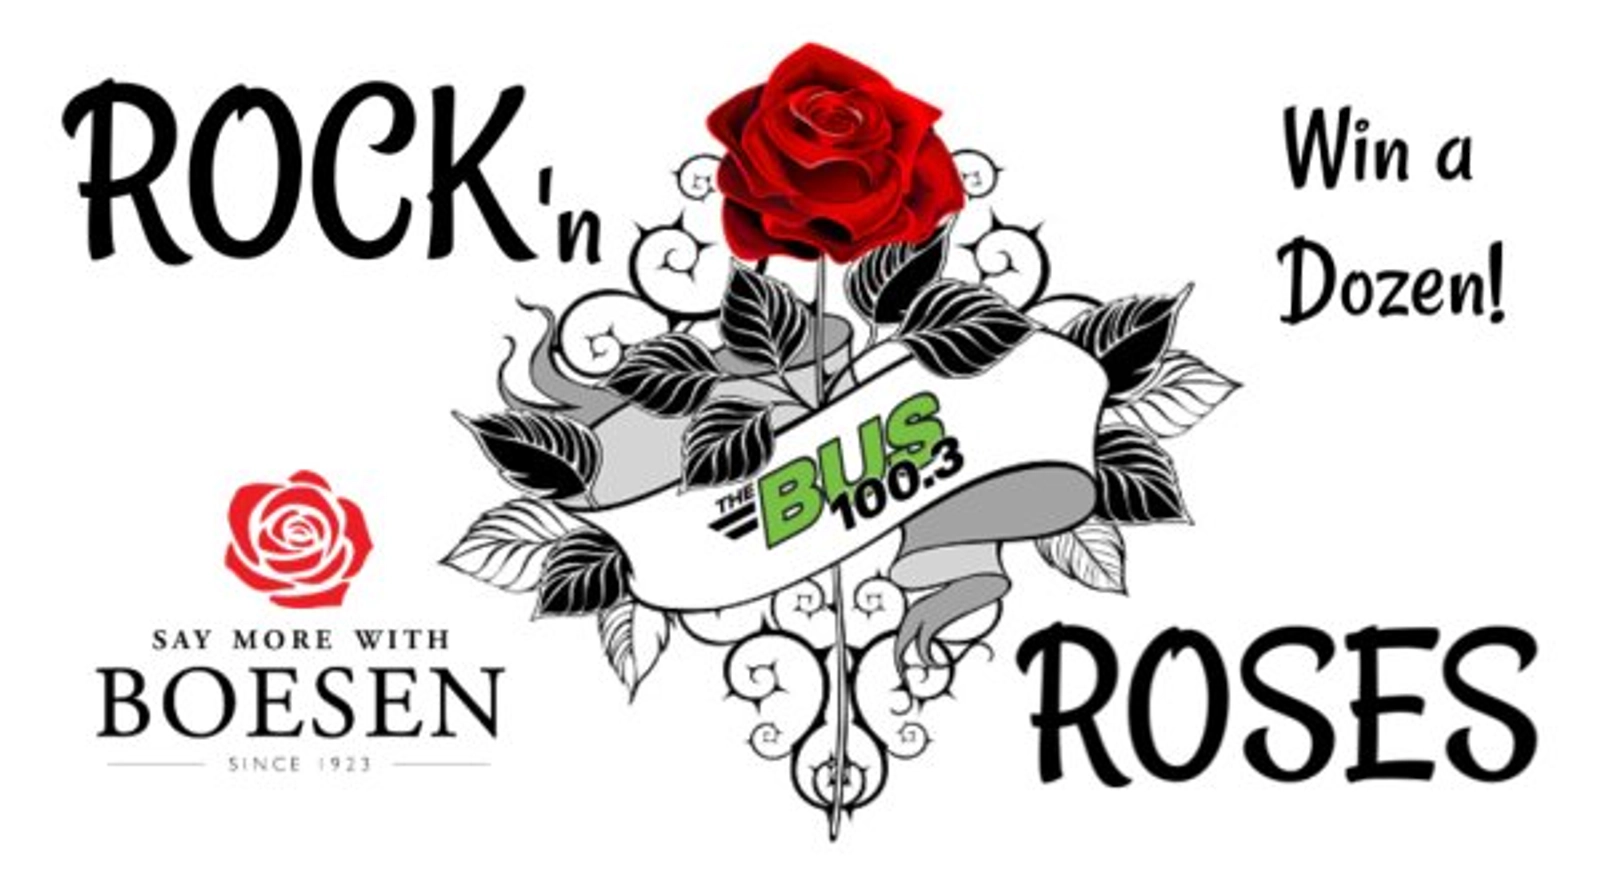 The BUS is Rock 'n' Roses with Boesen for Valentines! Win a Dozen Roses! - Thumbnail Image